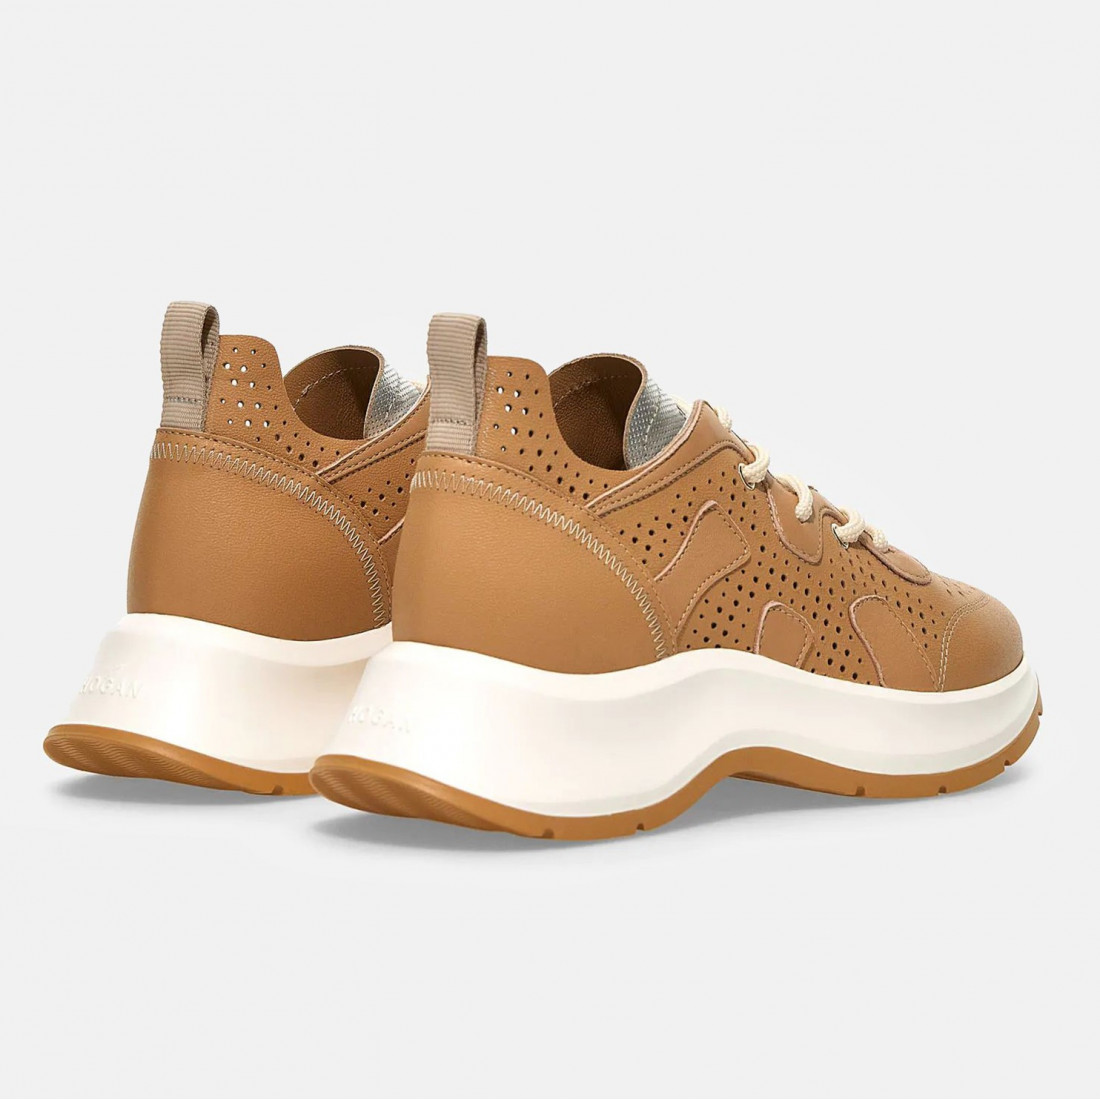 Hogan H585 light brown and gold sneakers for women in leather